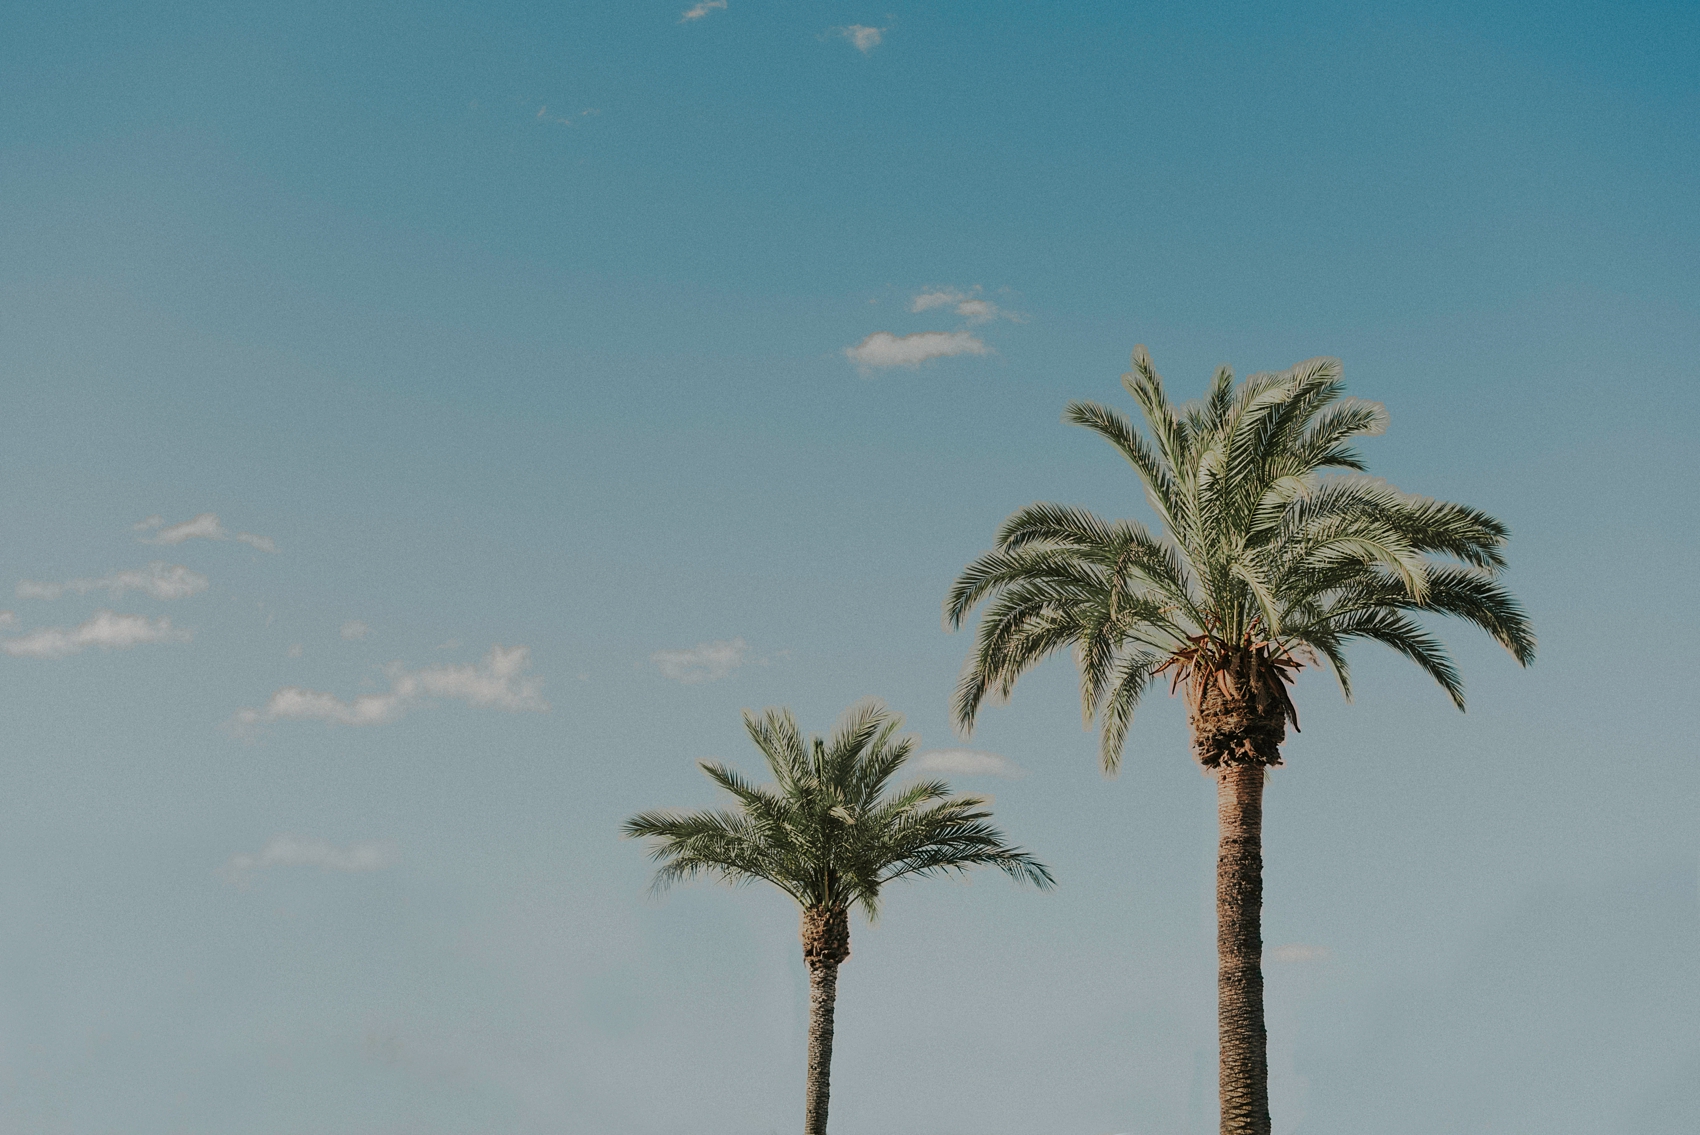 Palm trees in Downtown Tucson, Arizona photographed by Sue Ellen Aguirre